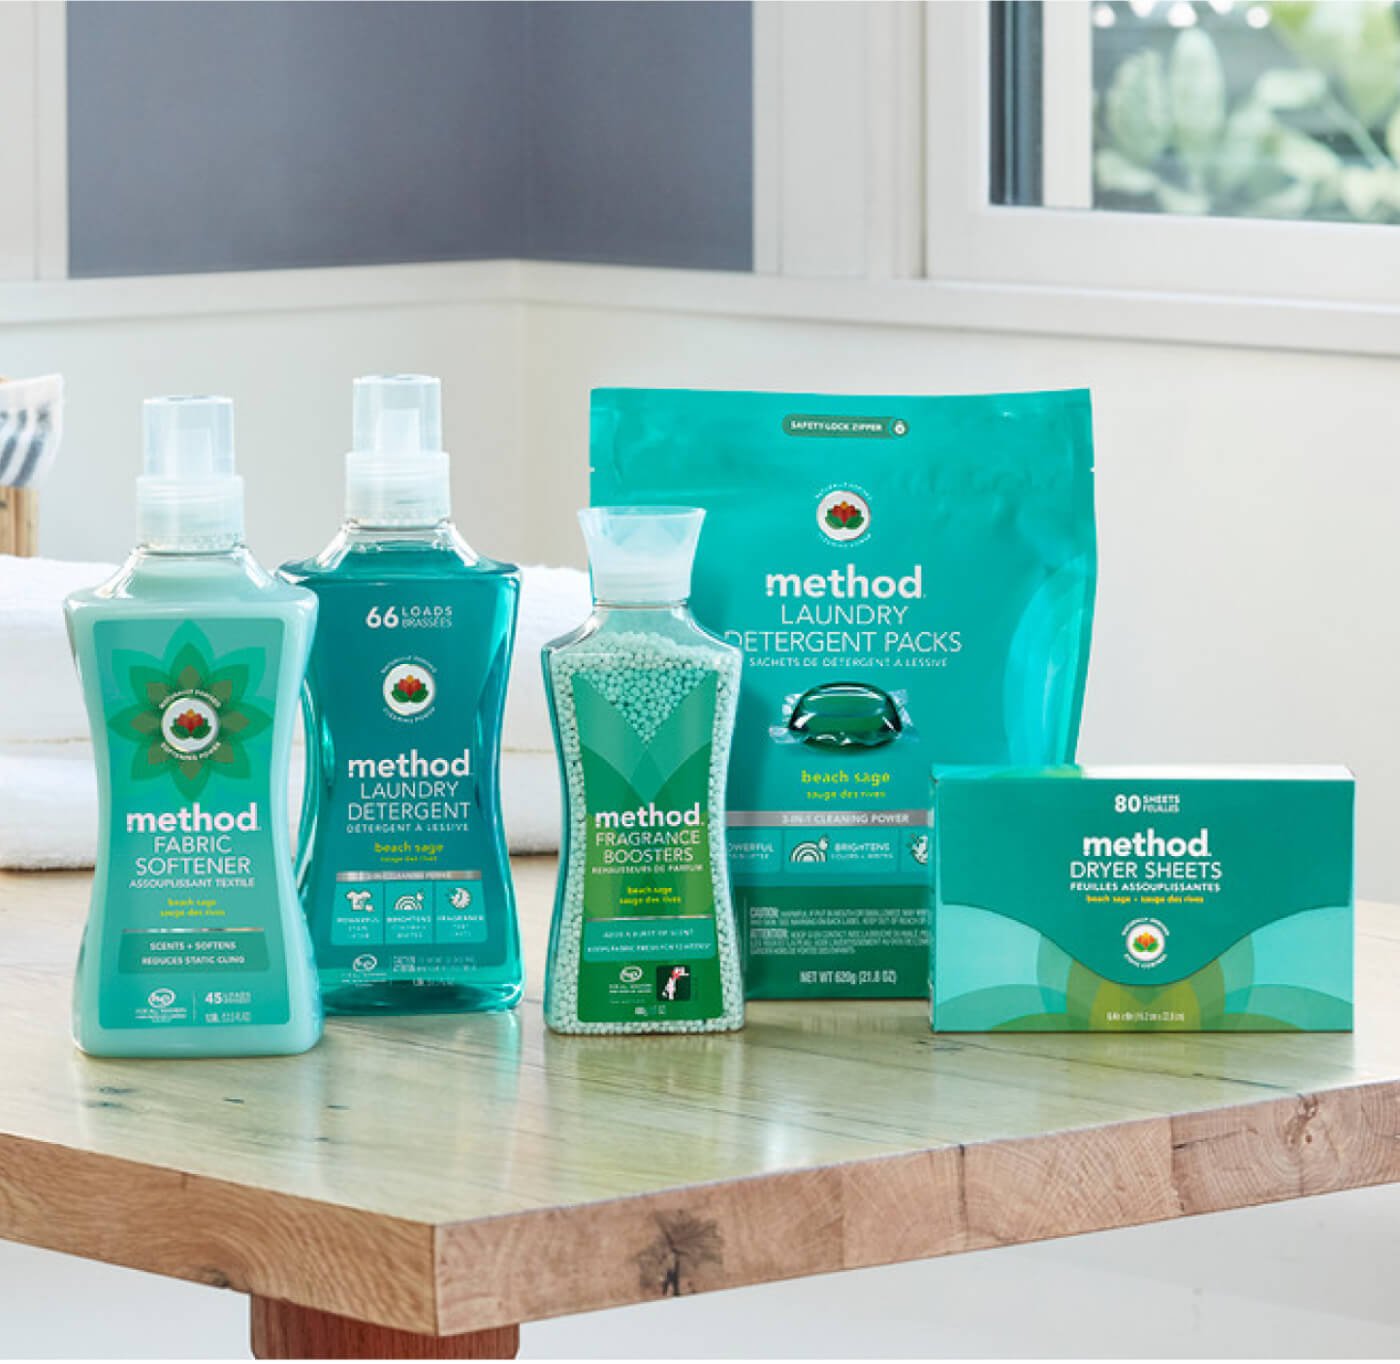 Eco-Conscious Laundry Sheets, Our Hypoallergenic Detergent Without Added  Scents - ECOS®